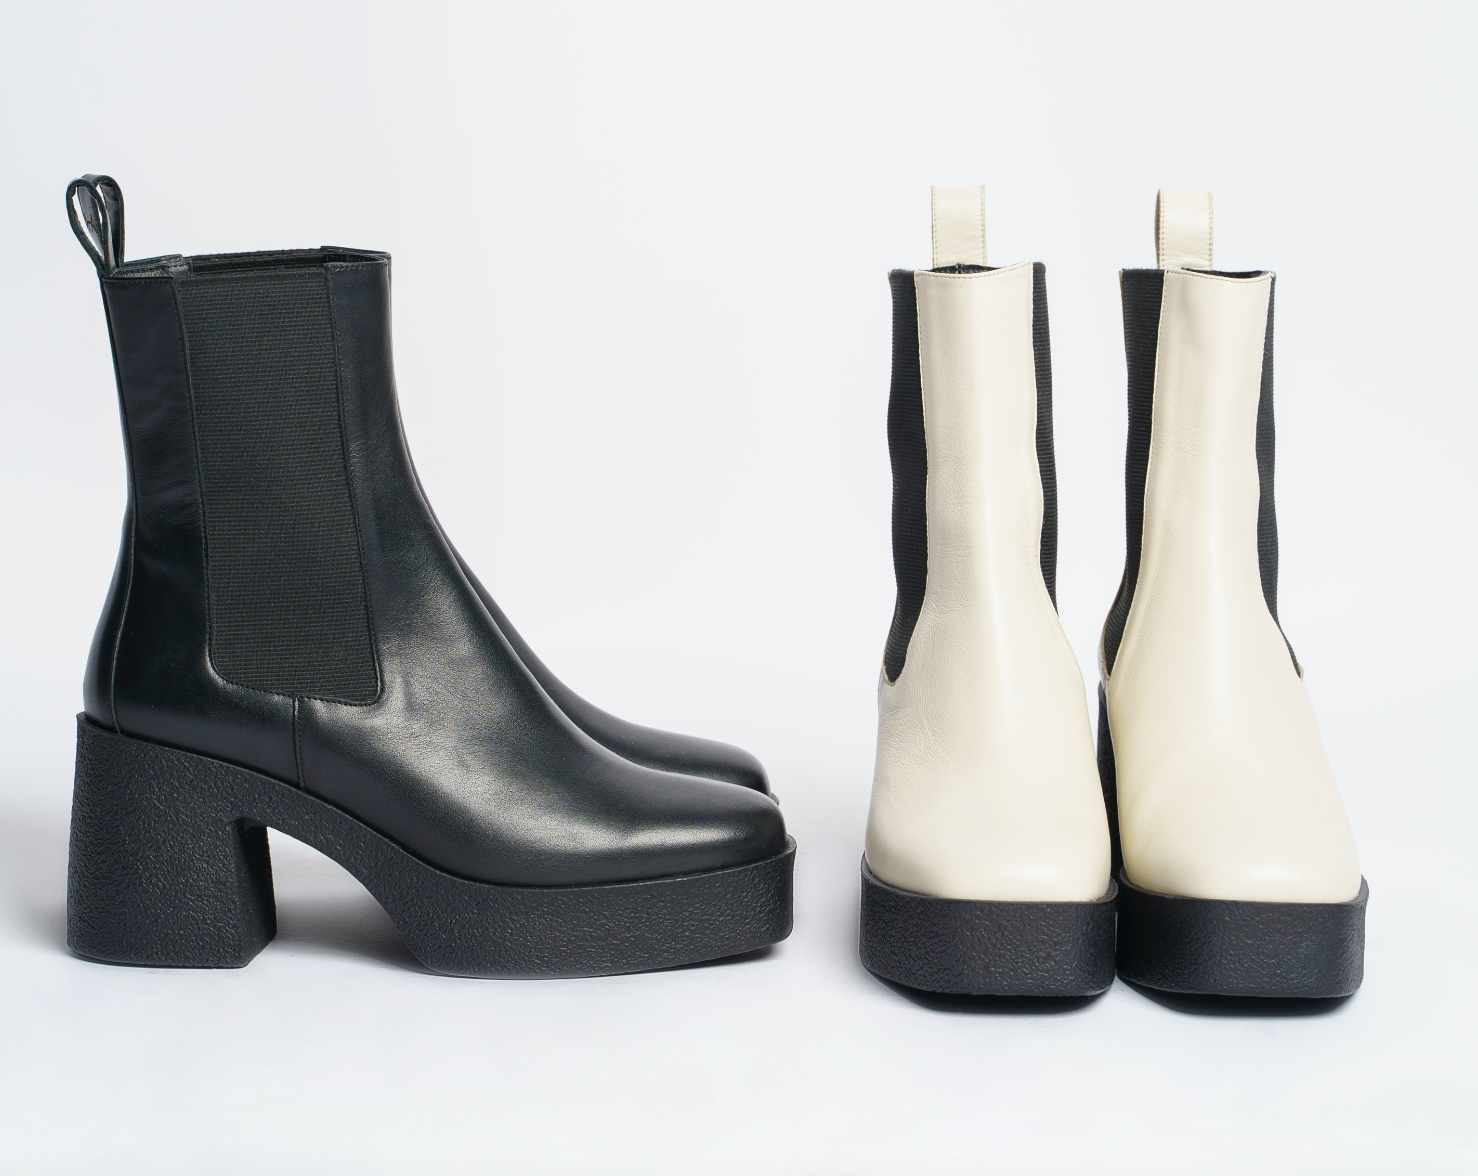 Momo Black Leather Chelsea Boots 20077-04-01 - 9